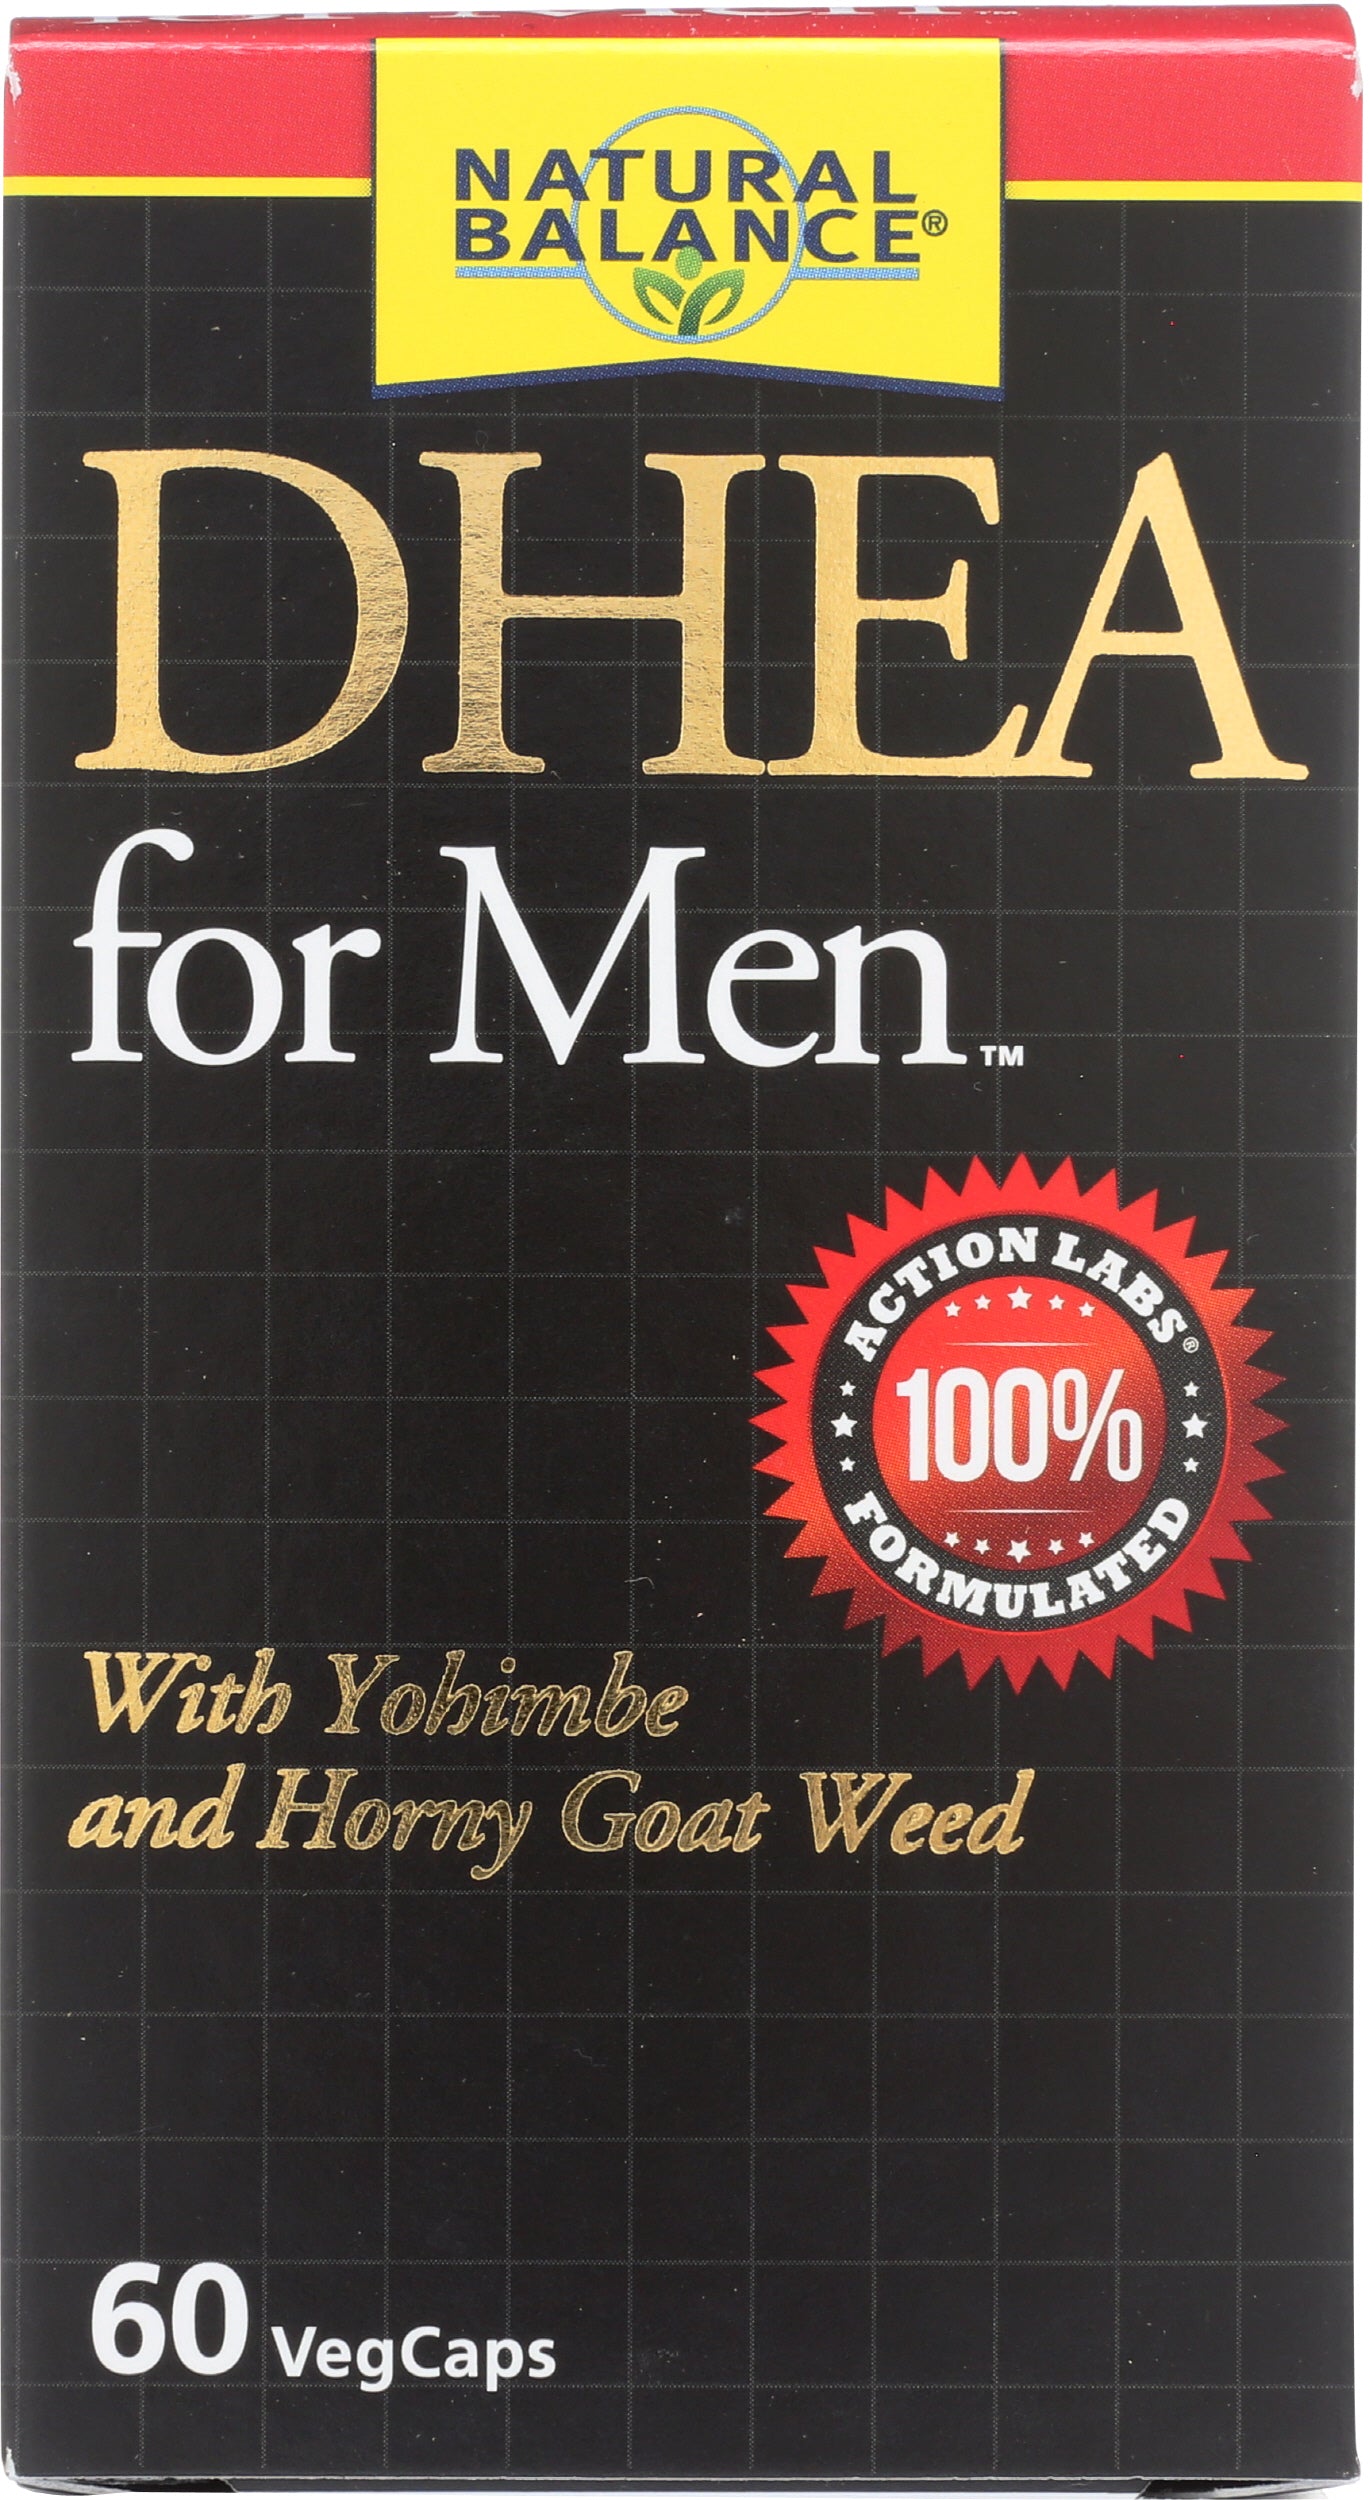 Natural Balance DHEA for Men Yohimbe and Horny Goat Weed 60 VegCaps Front of Box